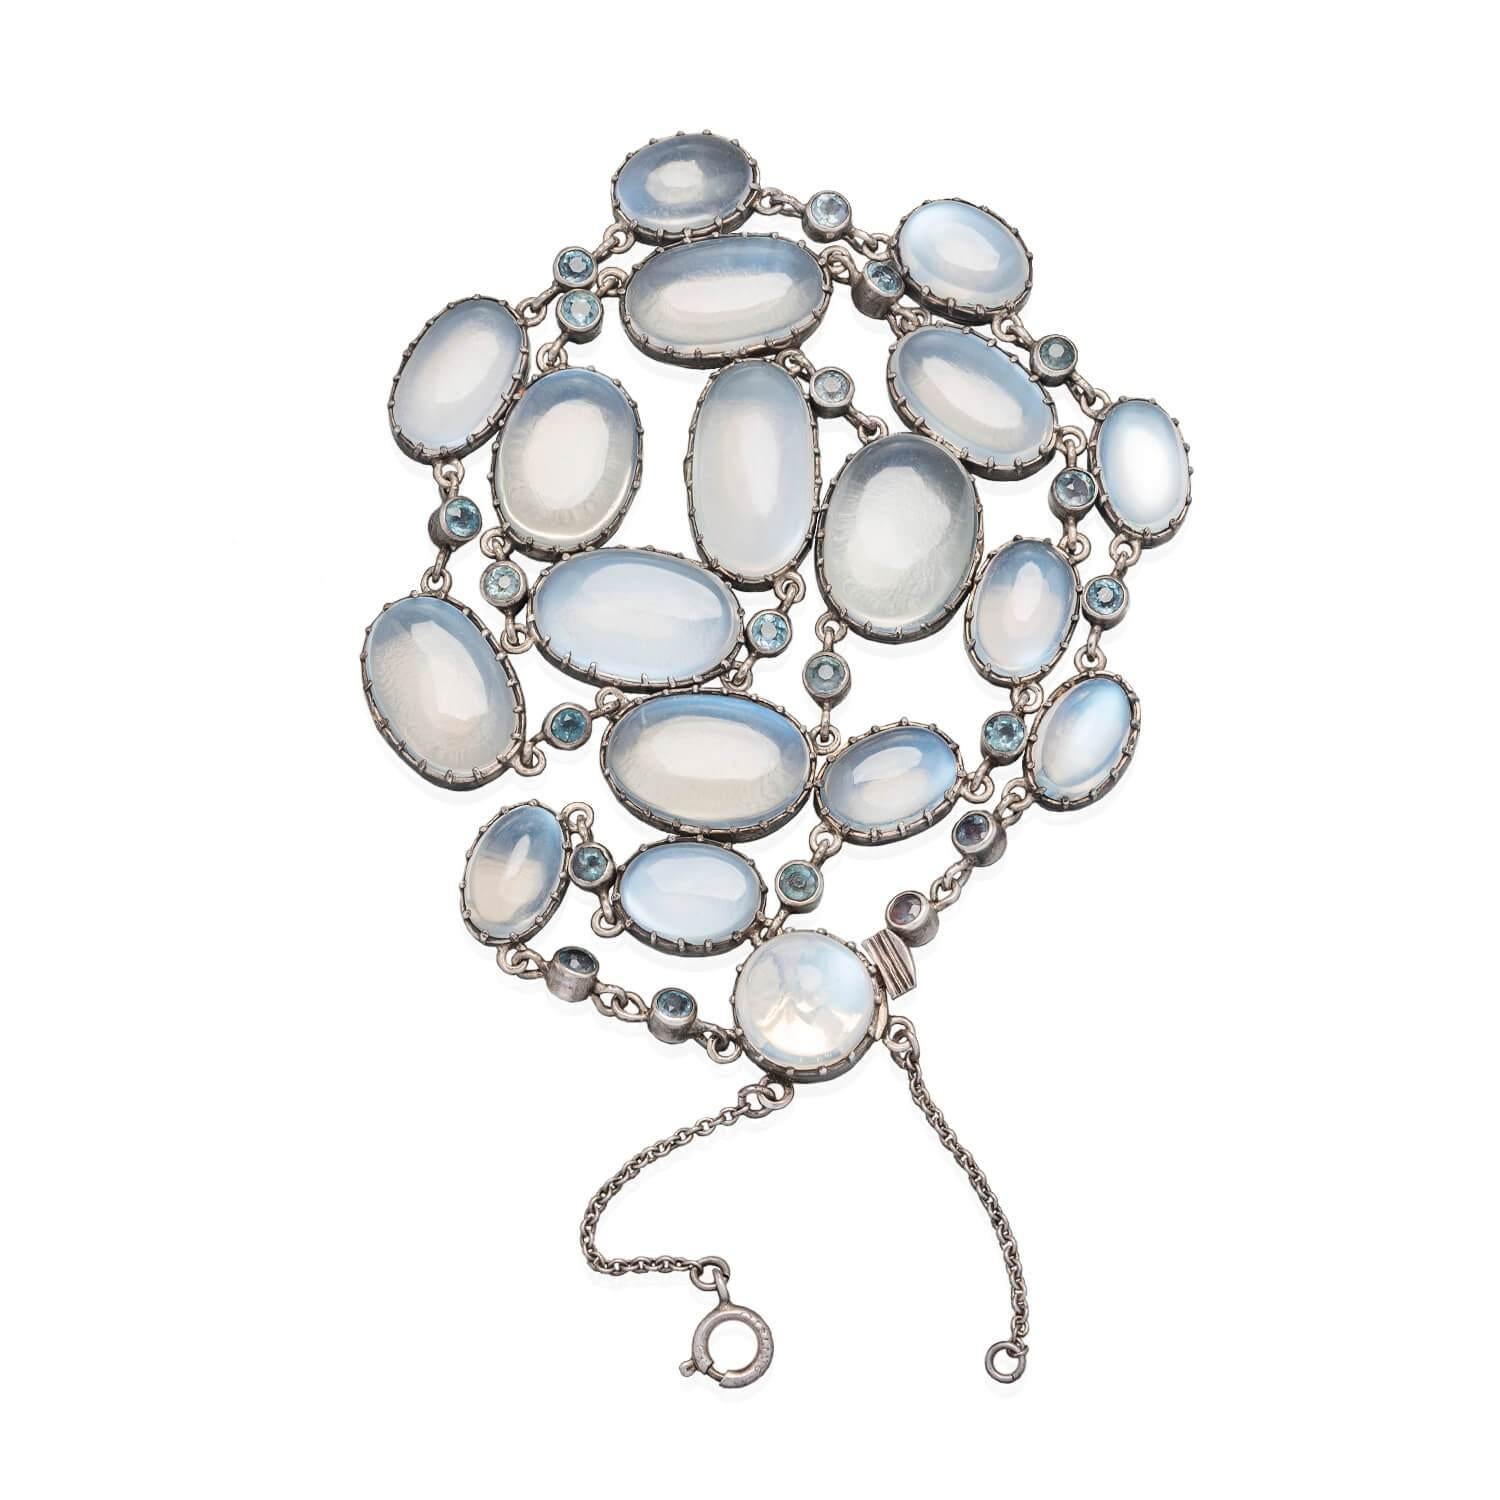 A stunning moonstone necklace from the Arts & Crafts era (ca1910s)! This incredible piece is crafted in sterling silver and comprised of stunning moonstone and blue zircon links. The necklace displays a moonstone chain, graduating slightly in size,